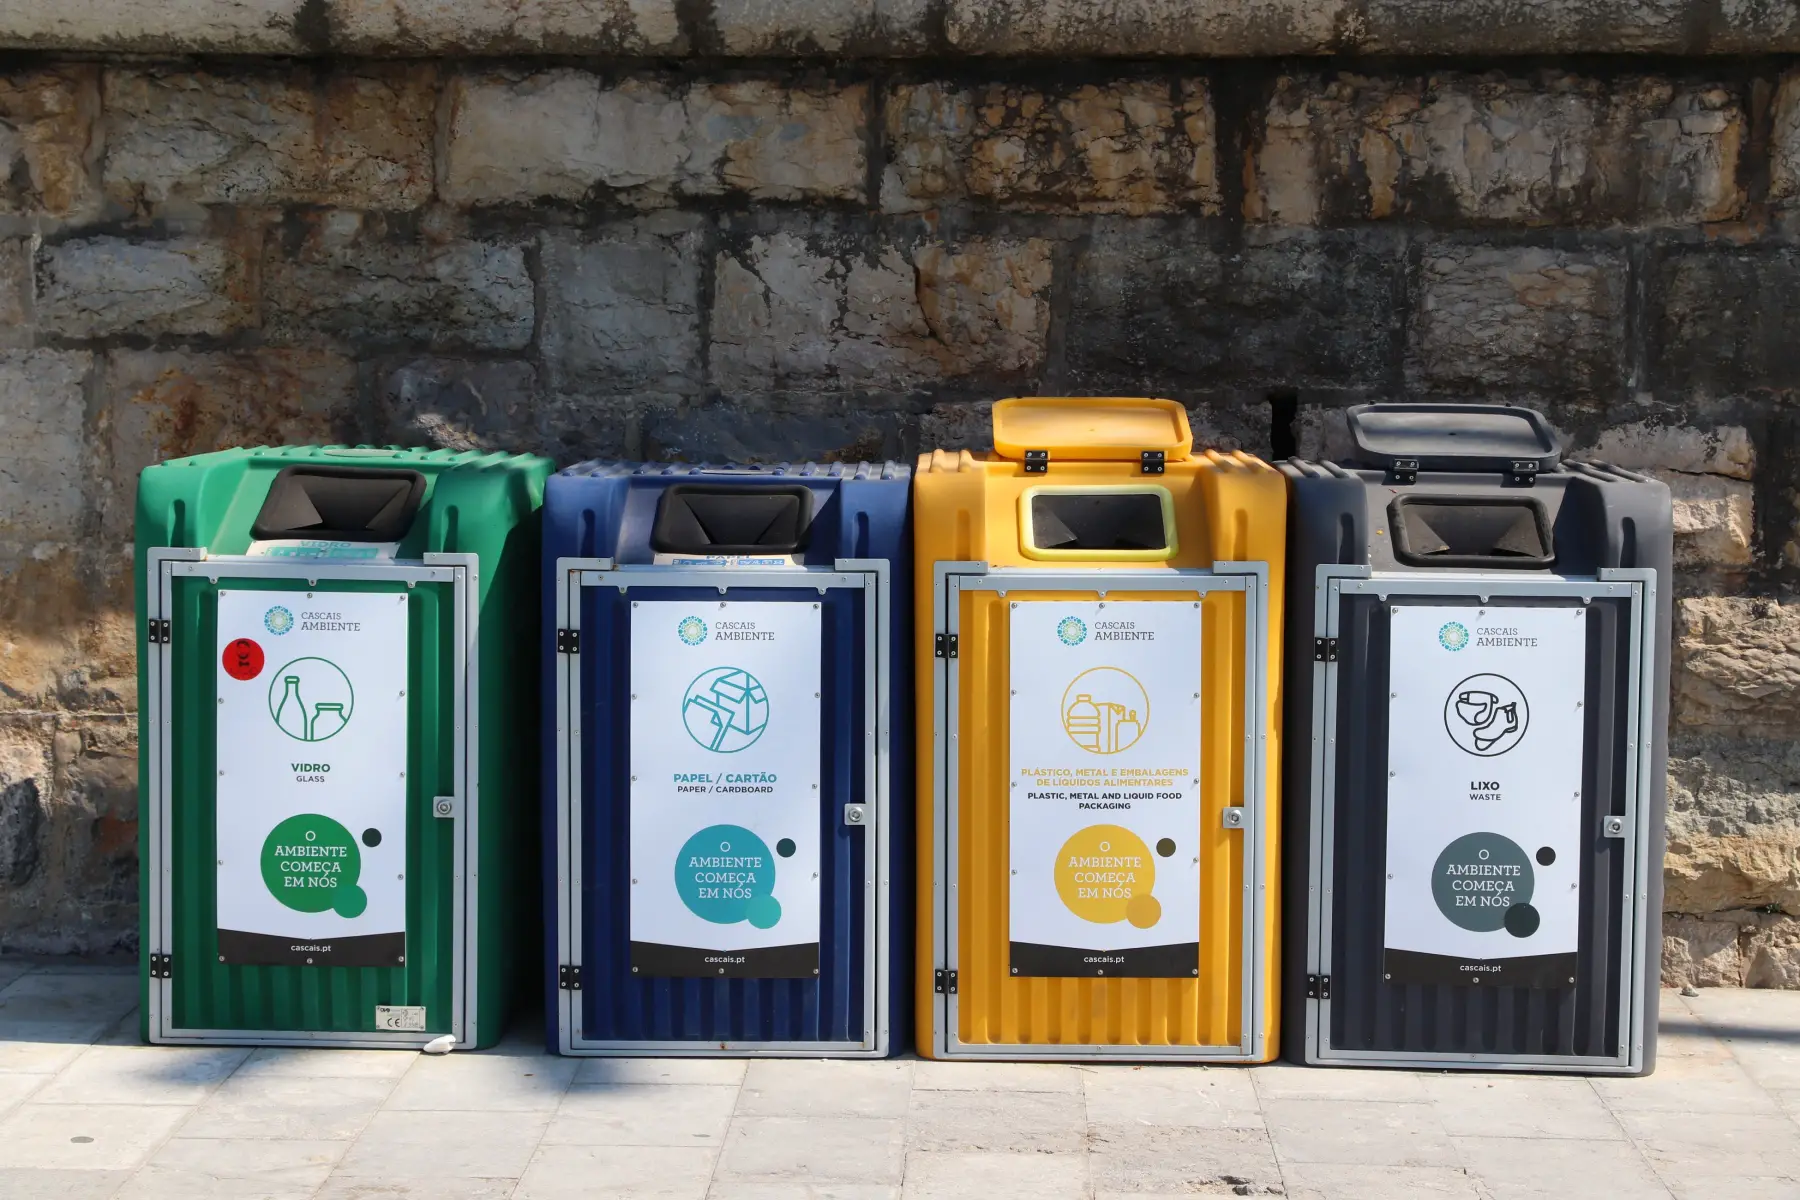 Four large recycling bins